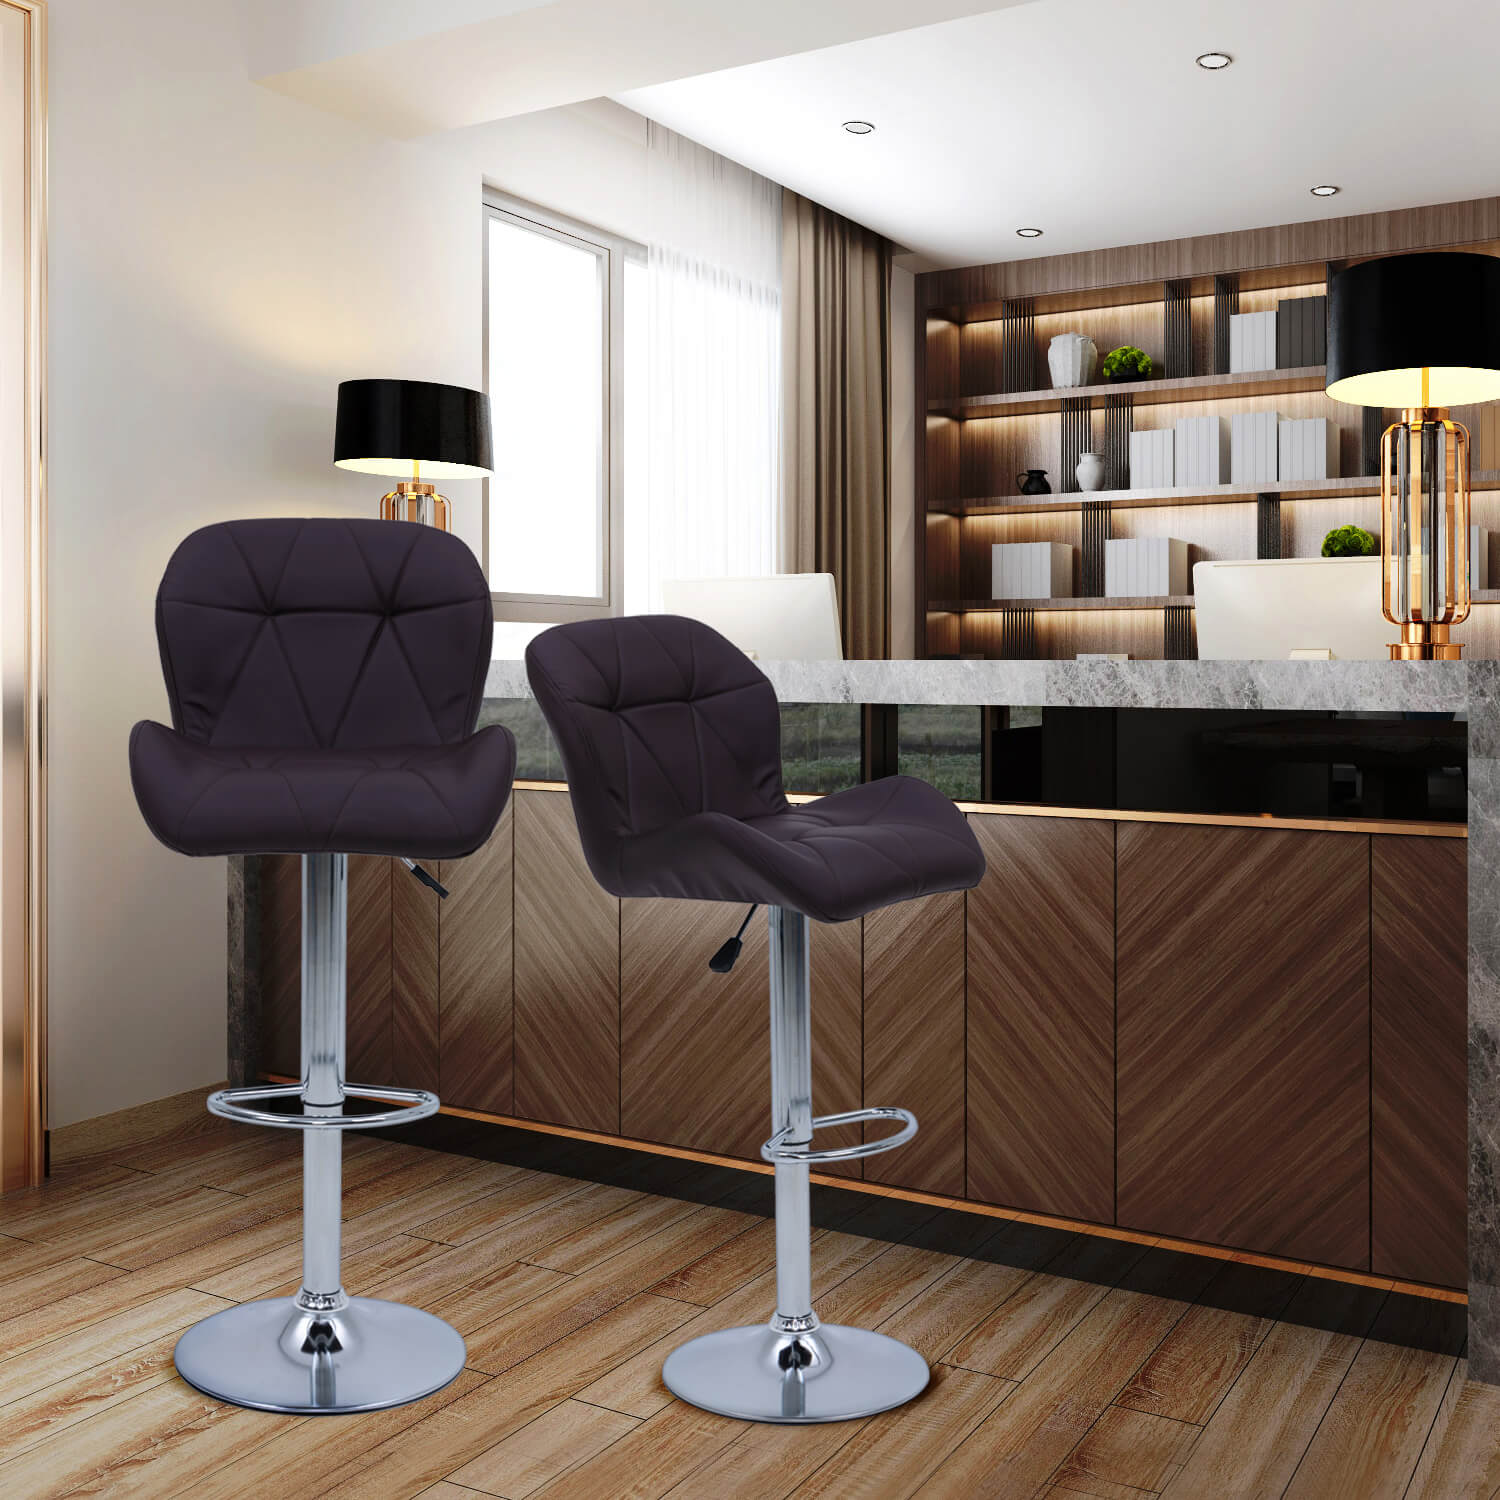 Elecwish Grid Brown Set of 2 Bar Stools OW010 is perfect for kitchen